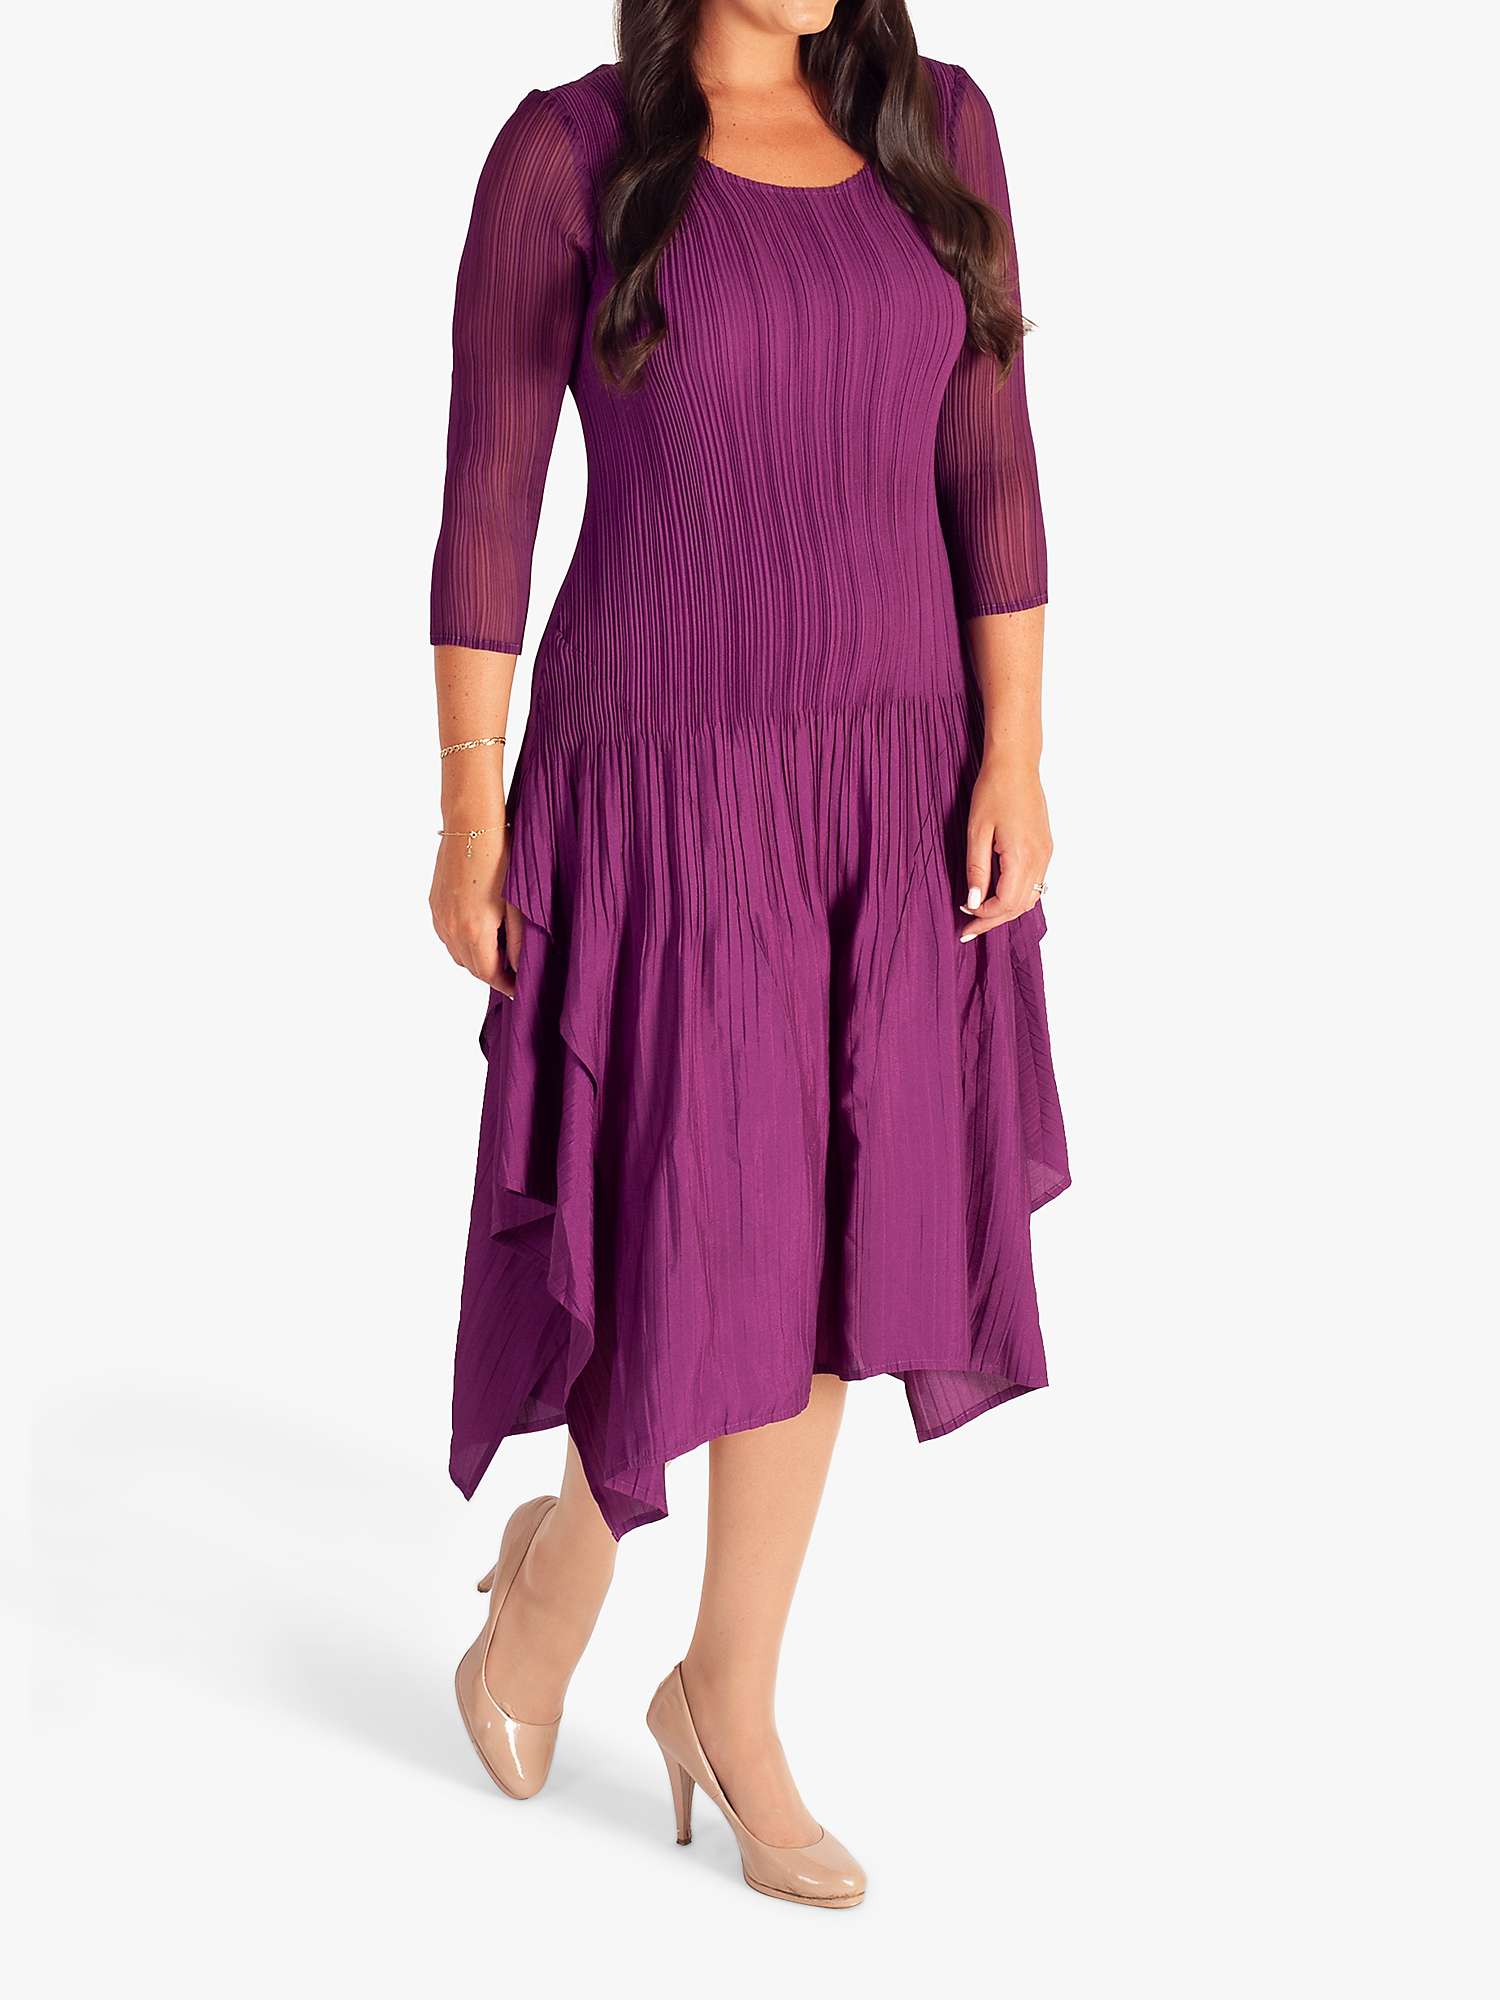 Buy chesca Crush Pleat Layered Dress Online at johnlewis.com